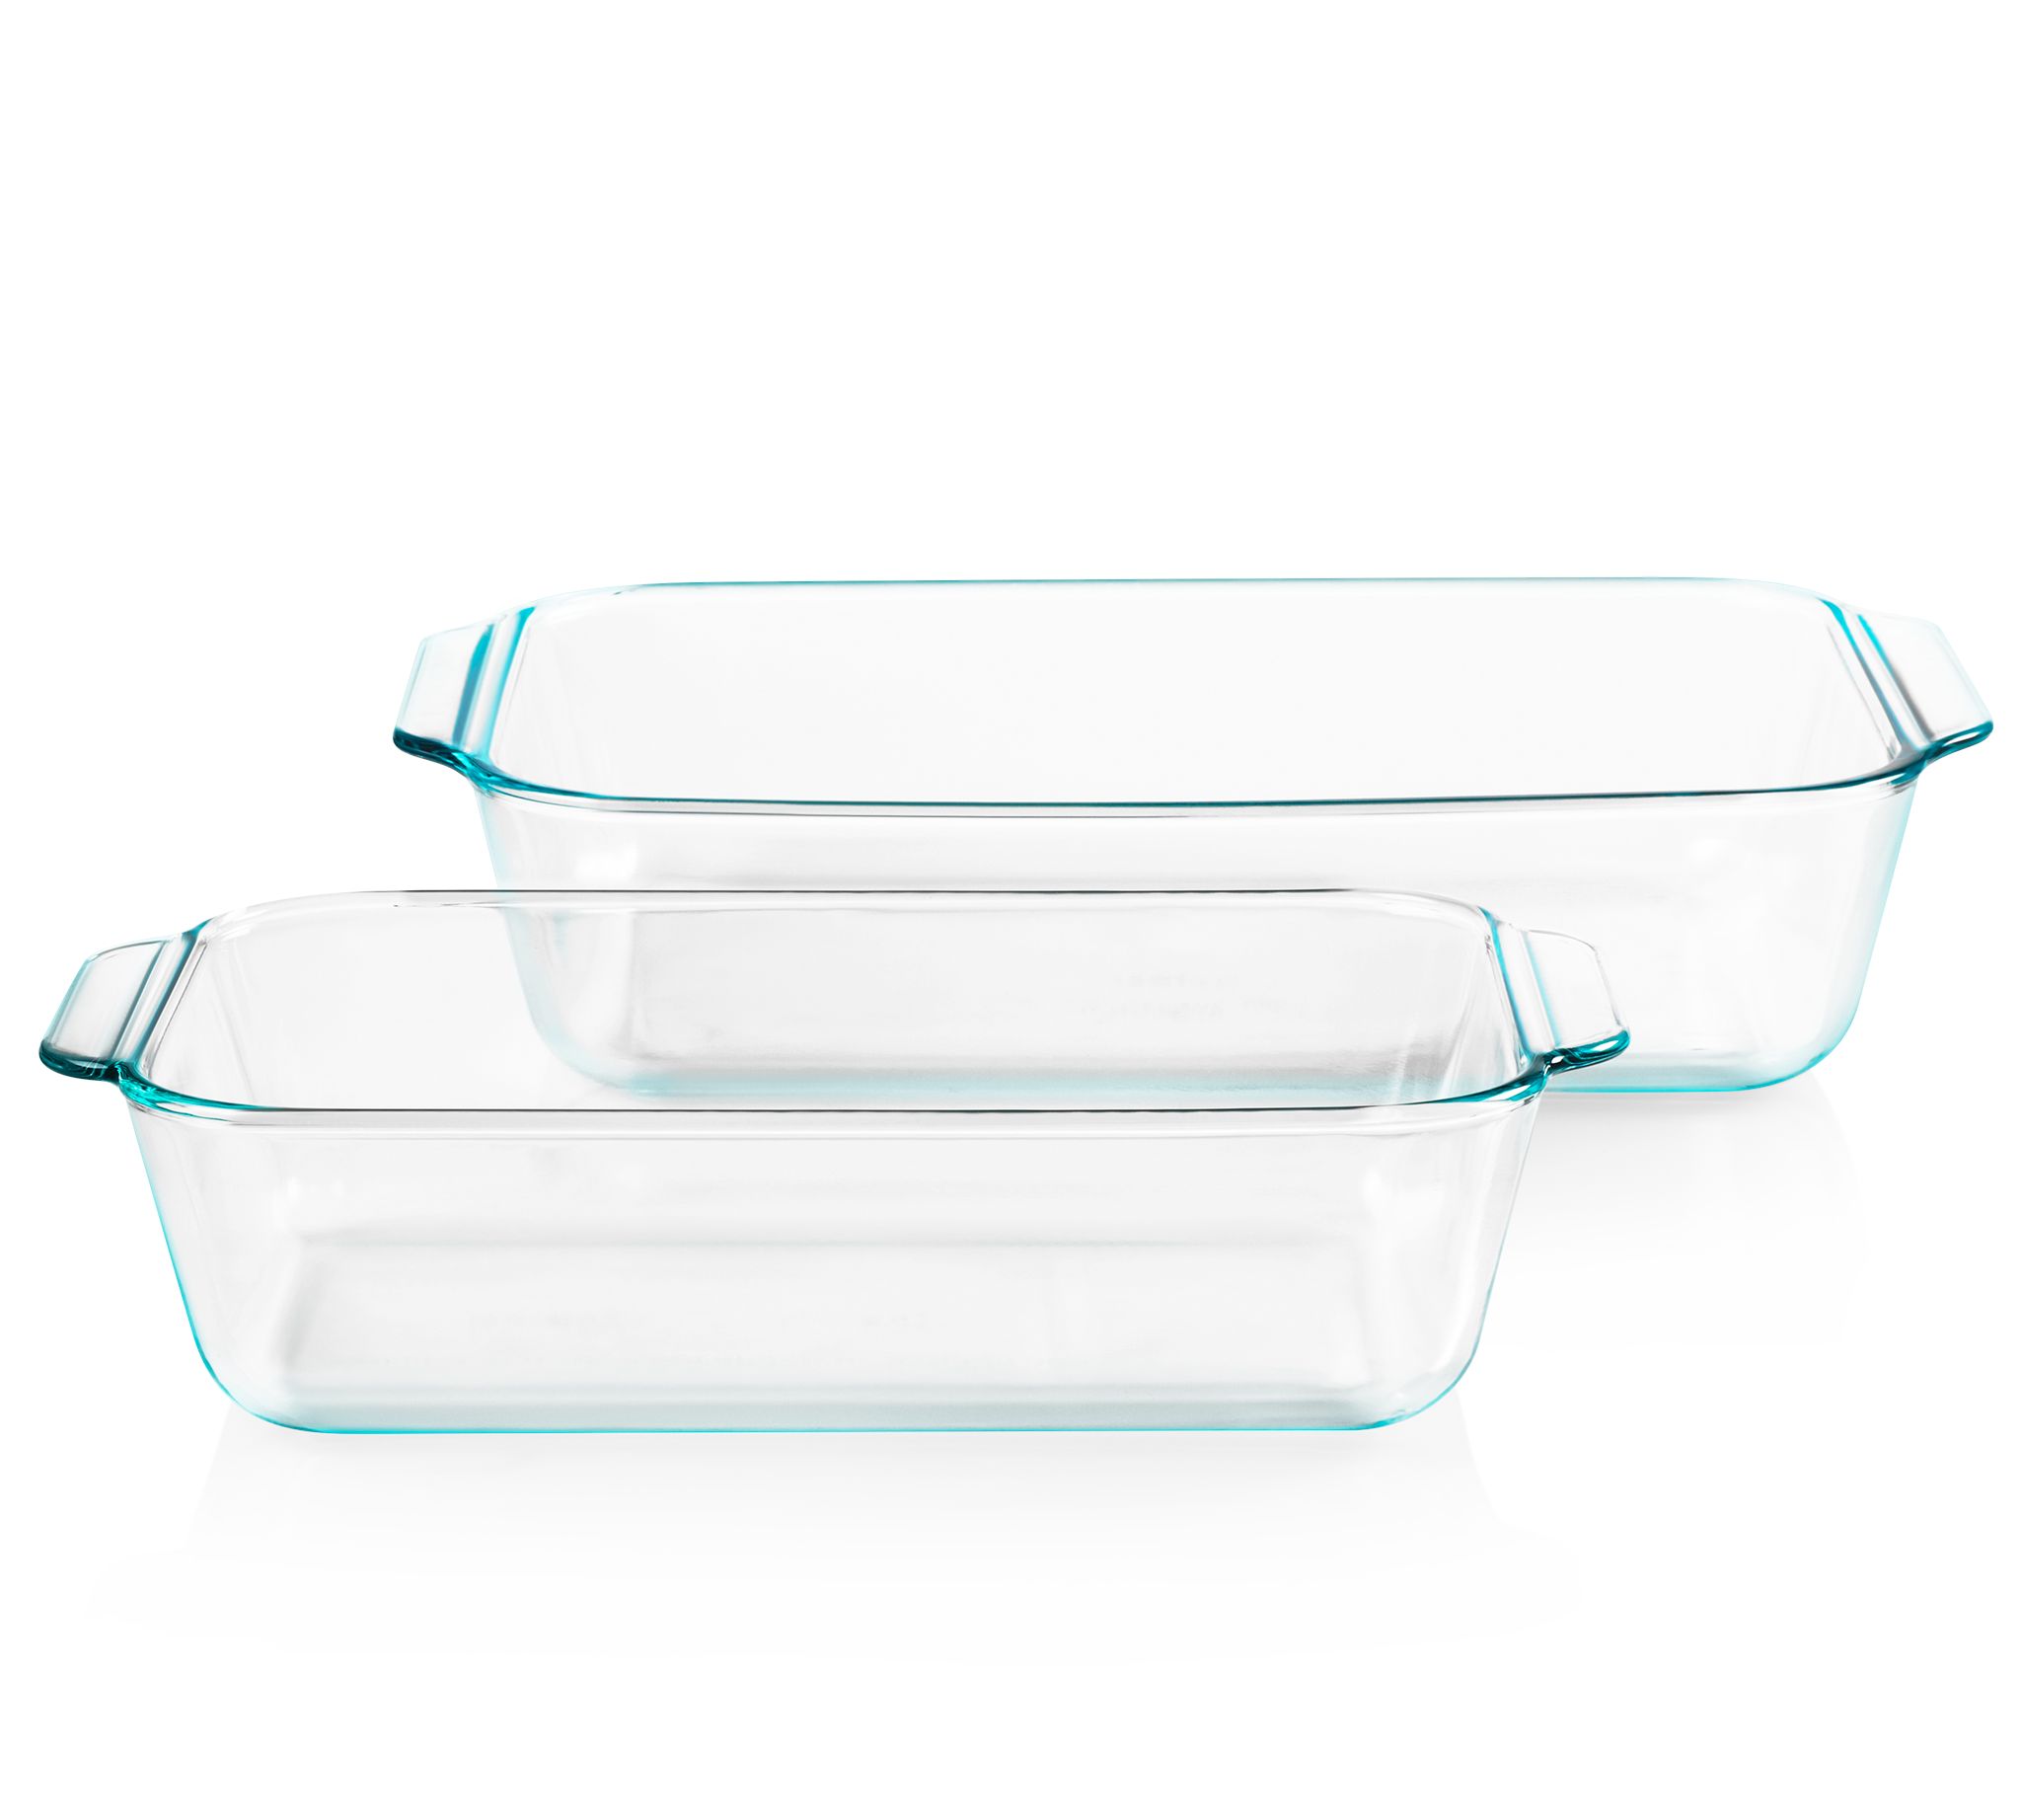 Pyrex Deep 2-Piece 9.5 Glass Baking Dish Set, Glass Bakeware Set, Dishwasher, Microwave, Freezer and Pre-Heated Oven Safe, Deep & Easy Grab